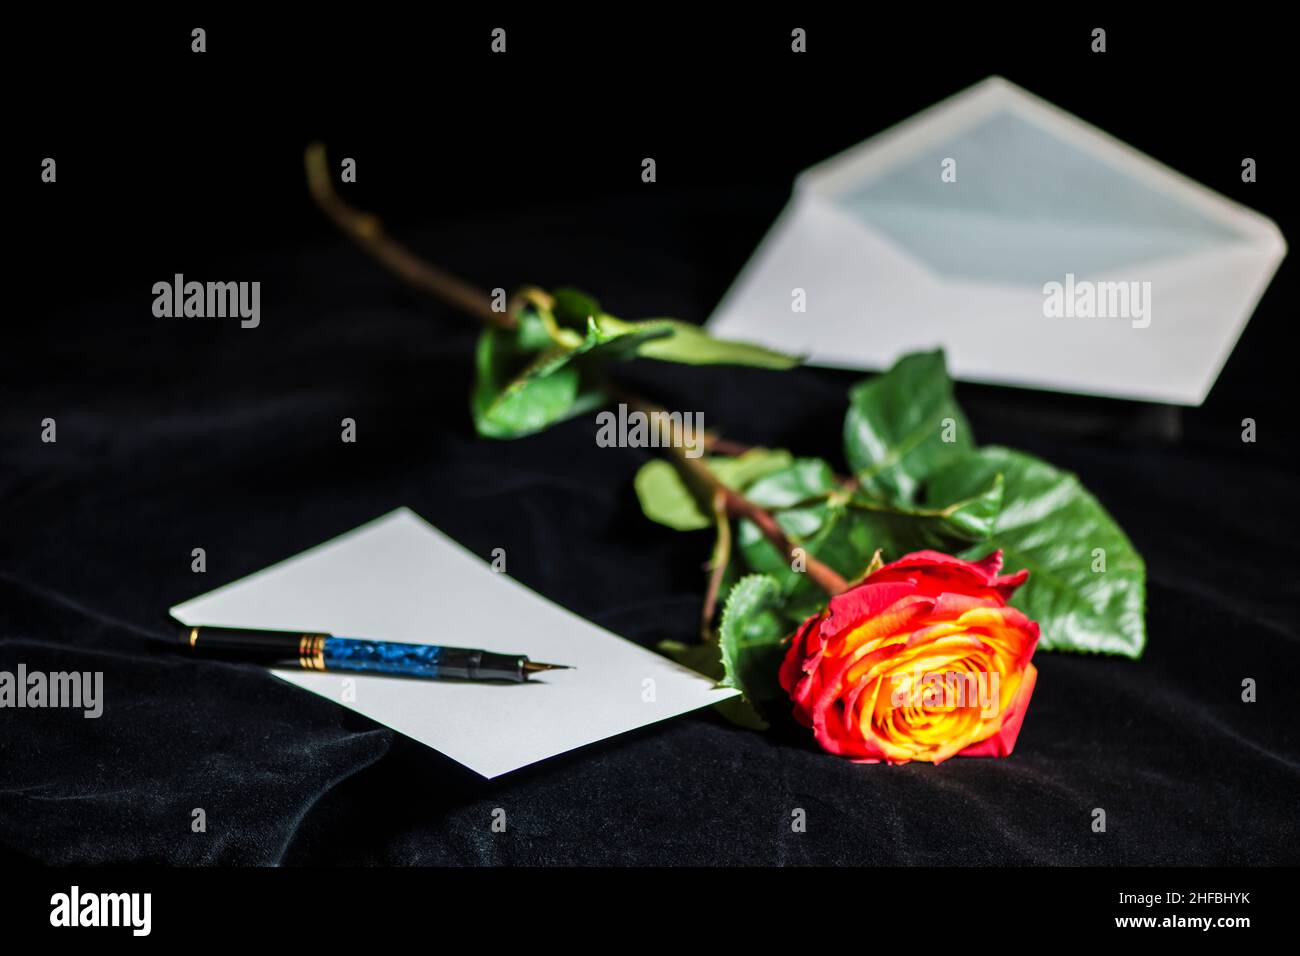 Close-up of a fiery red rose lying on black velvet with envelope and fountain pen at aperture f3. Stock Photo